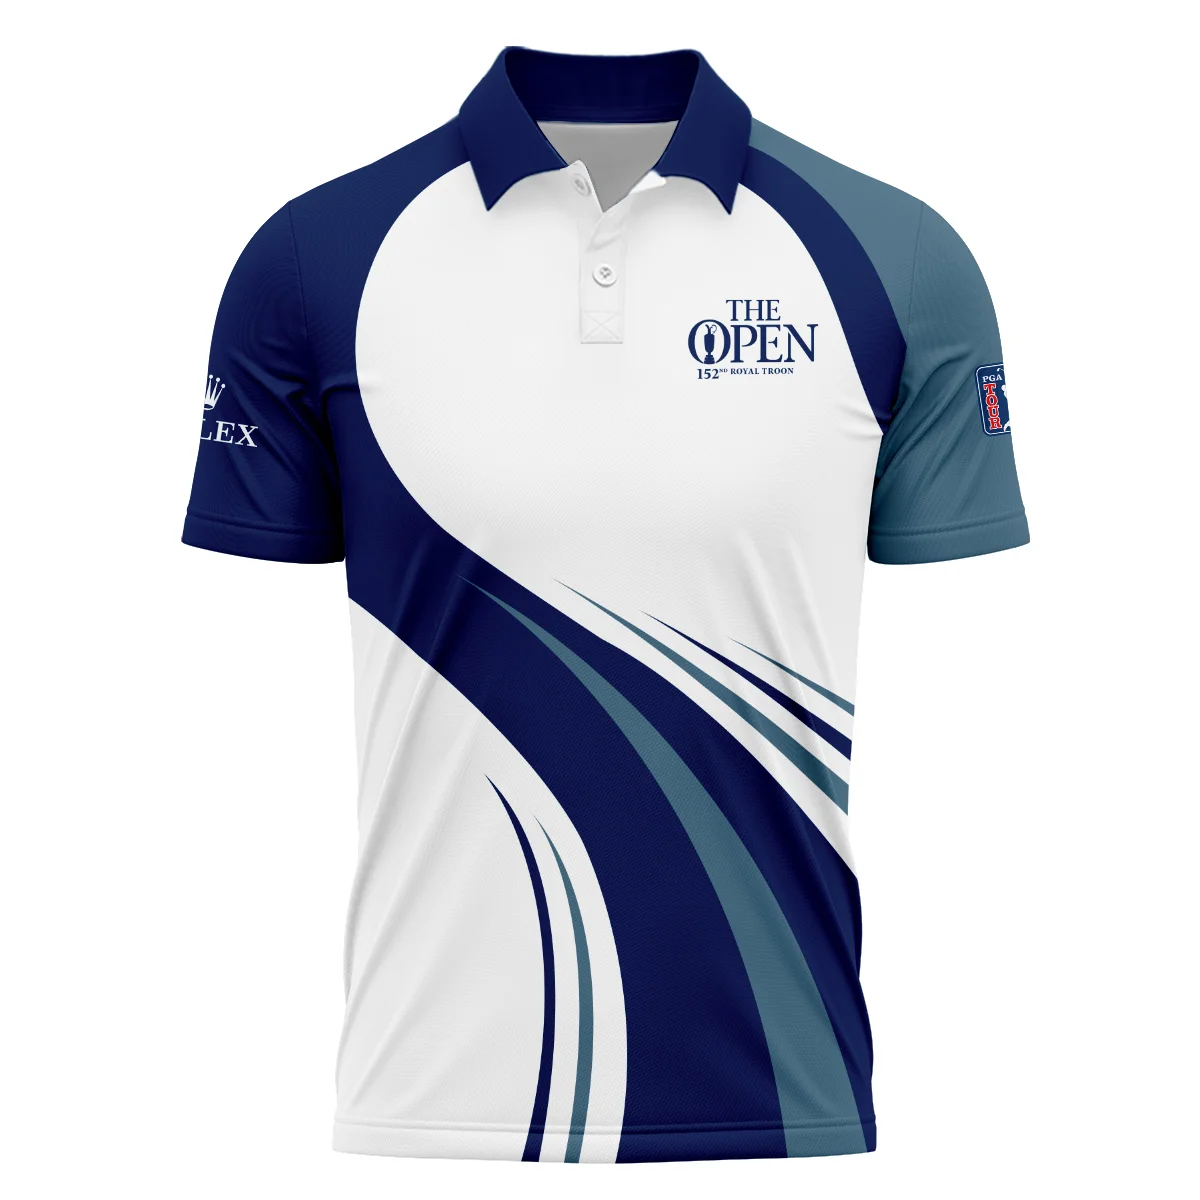 152nd Open Championship Rolex White Mostly Desaturated Dark Blue Polo Shirt All Over Prints HOTOP270624A02ROXPL